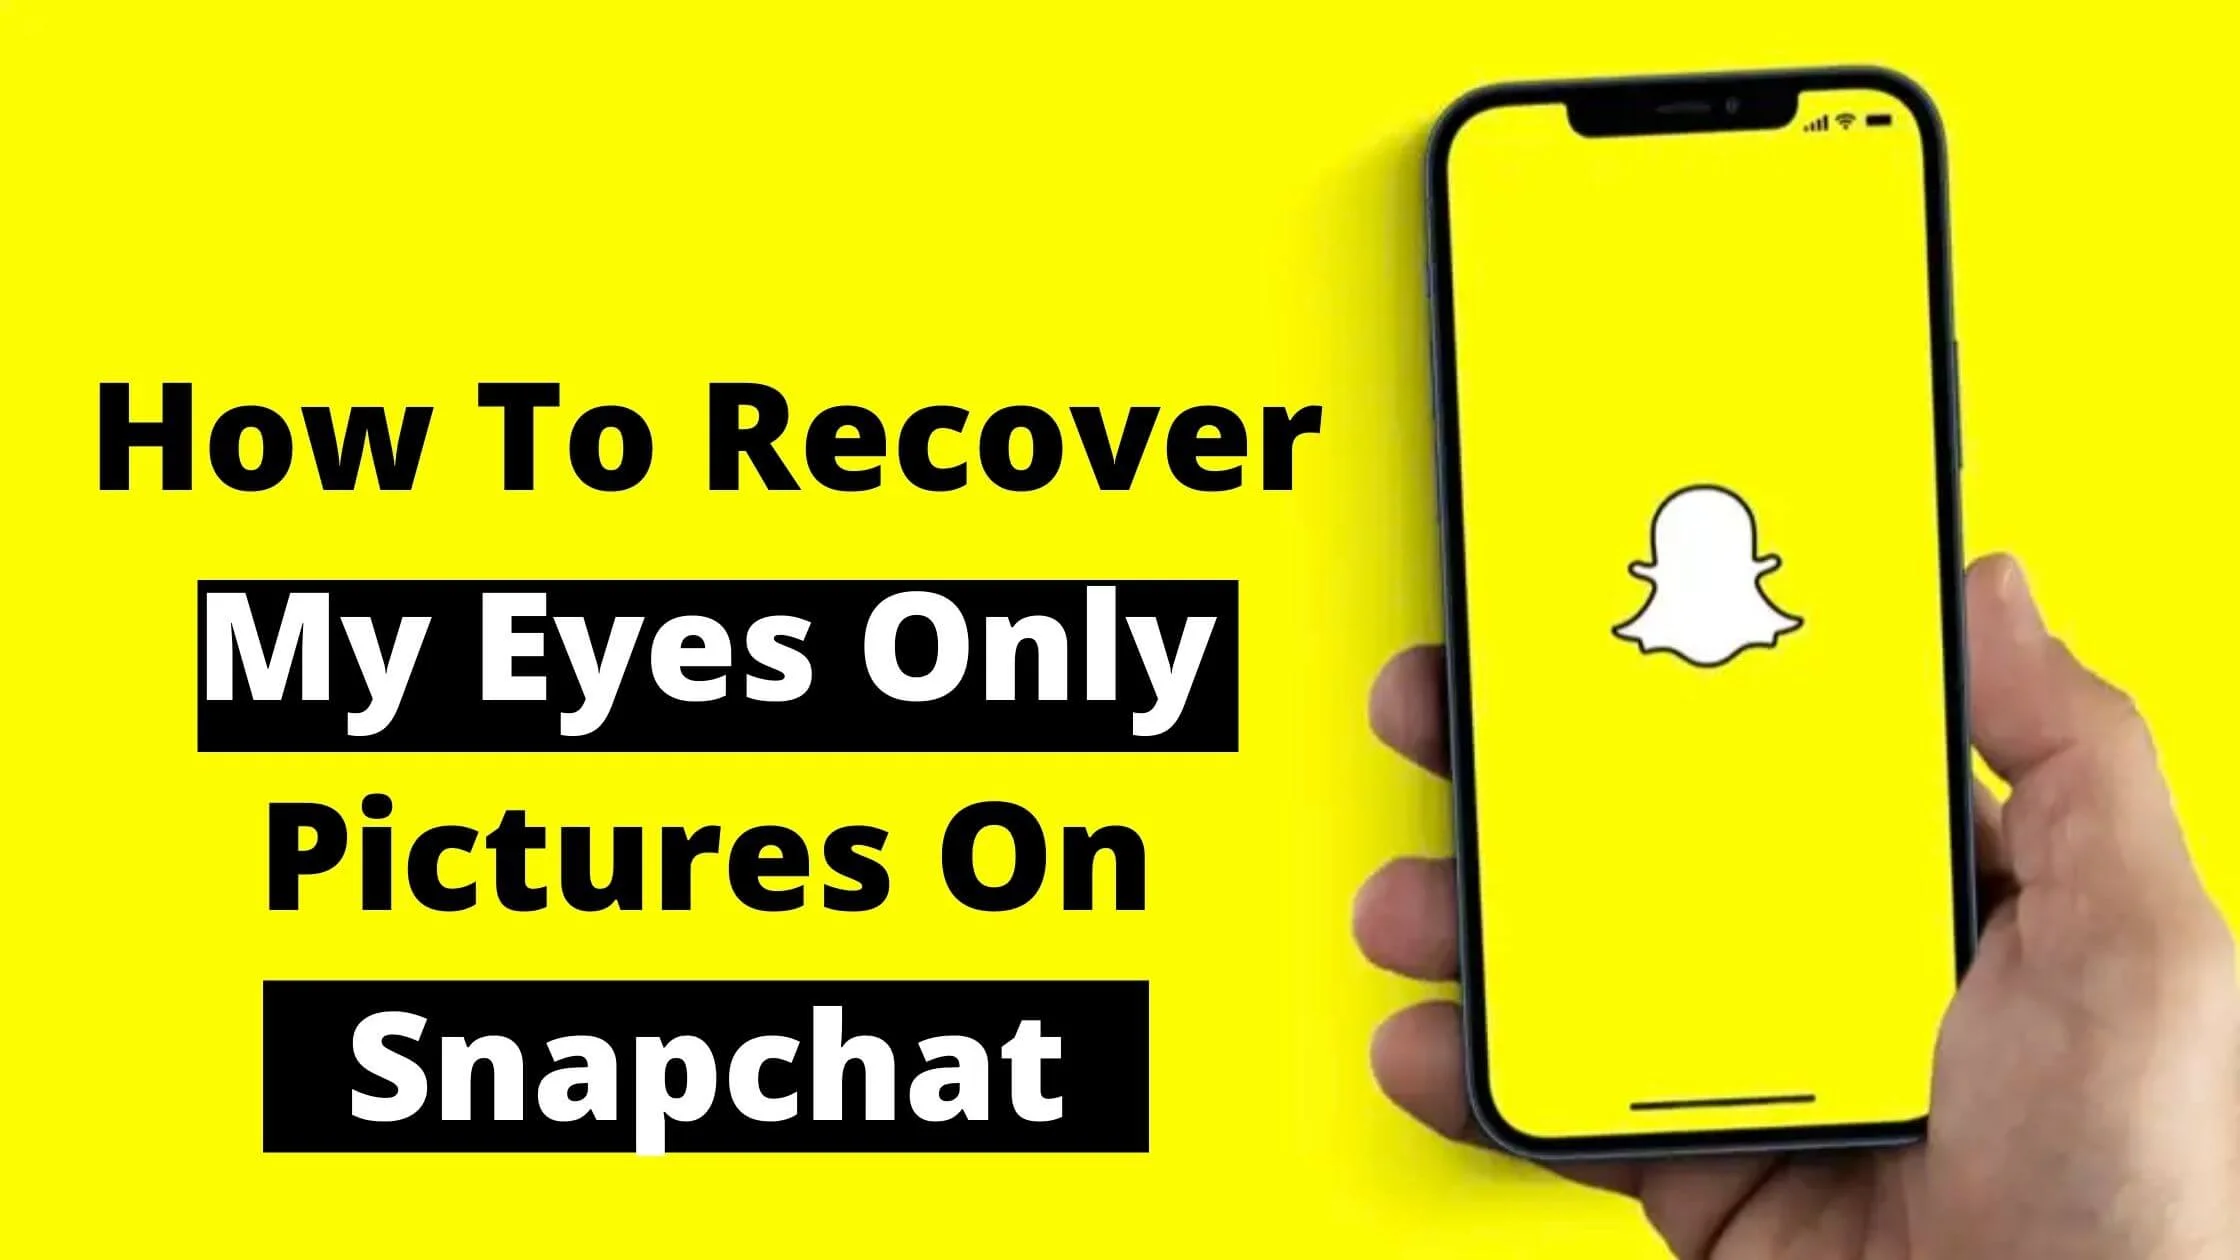 How To Recover My Eyes Only Pictures On Snapchat